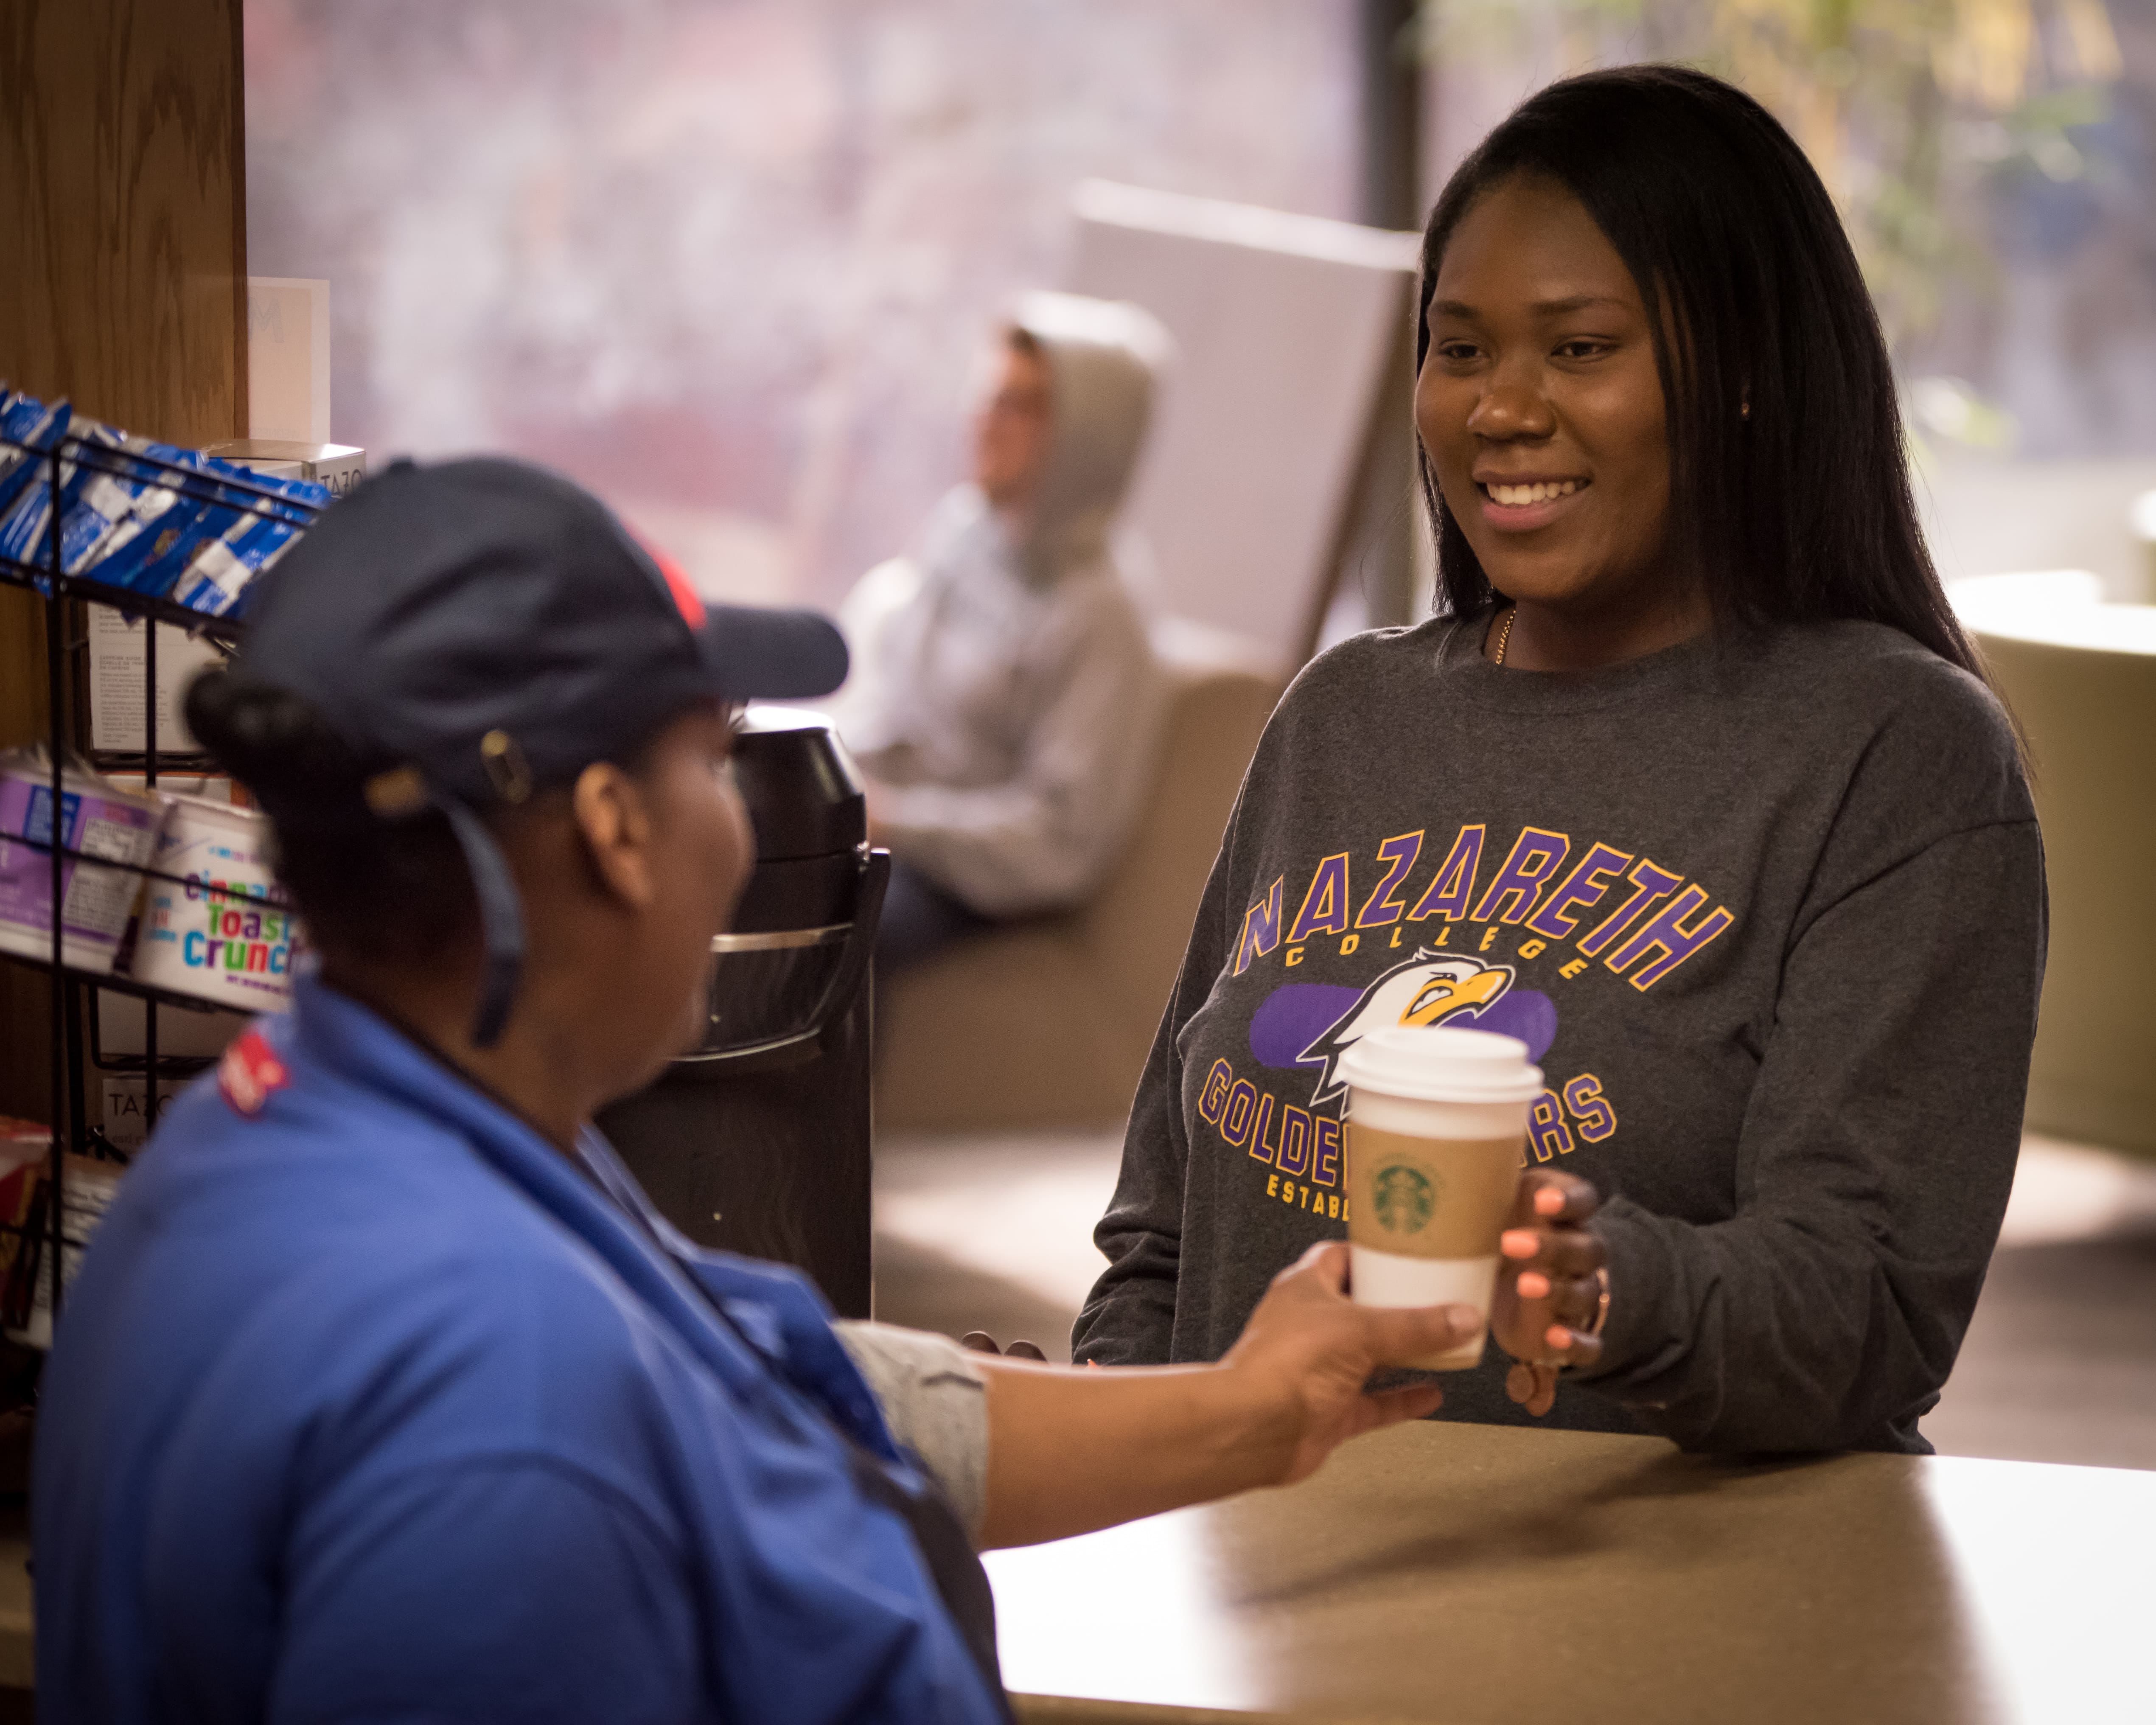 Dining Services at Nazareth College in Rochester, NY